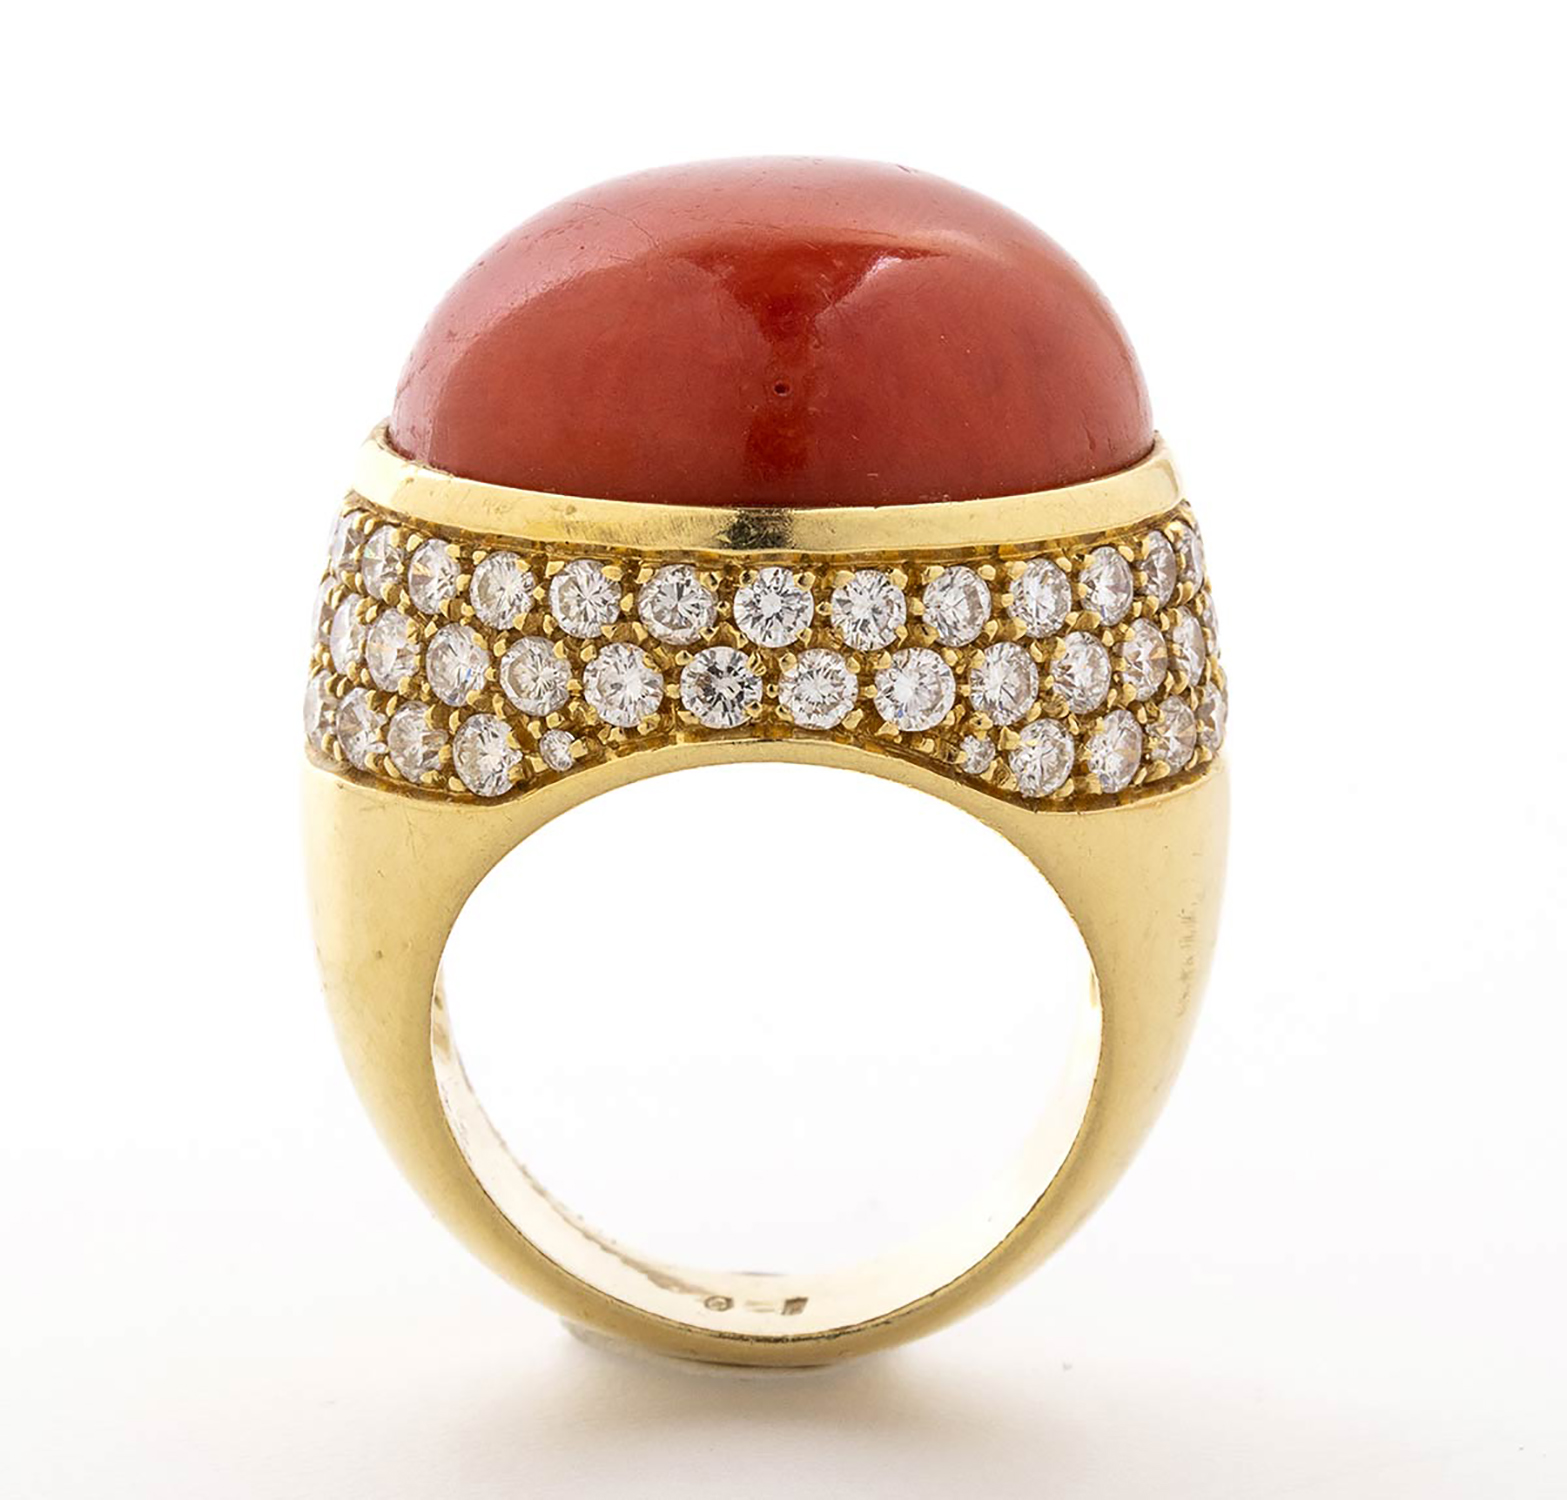 Cerasuolo coral and diamonds ring - Image 2 of 9